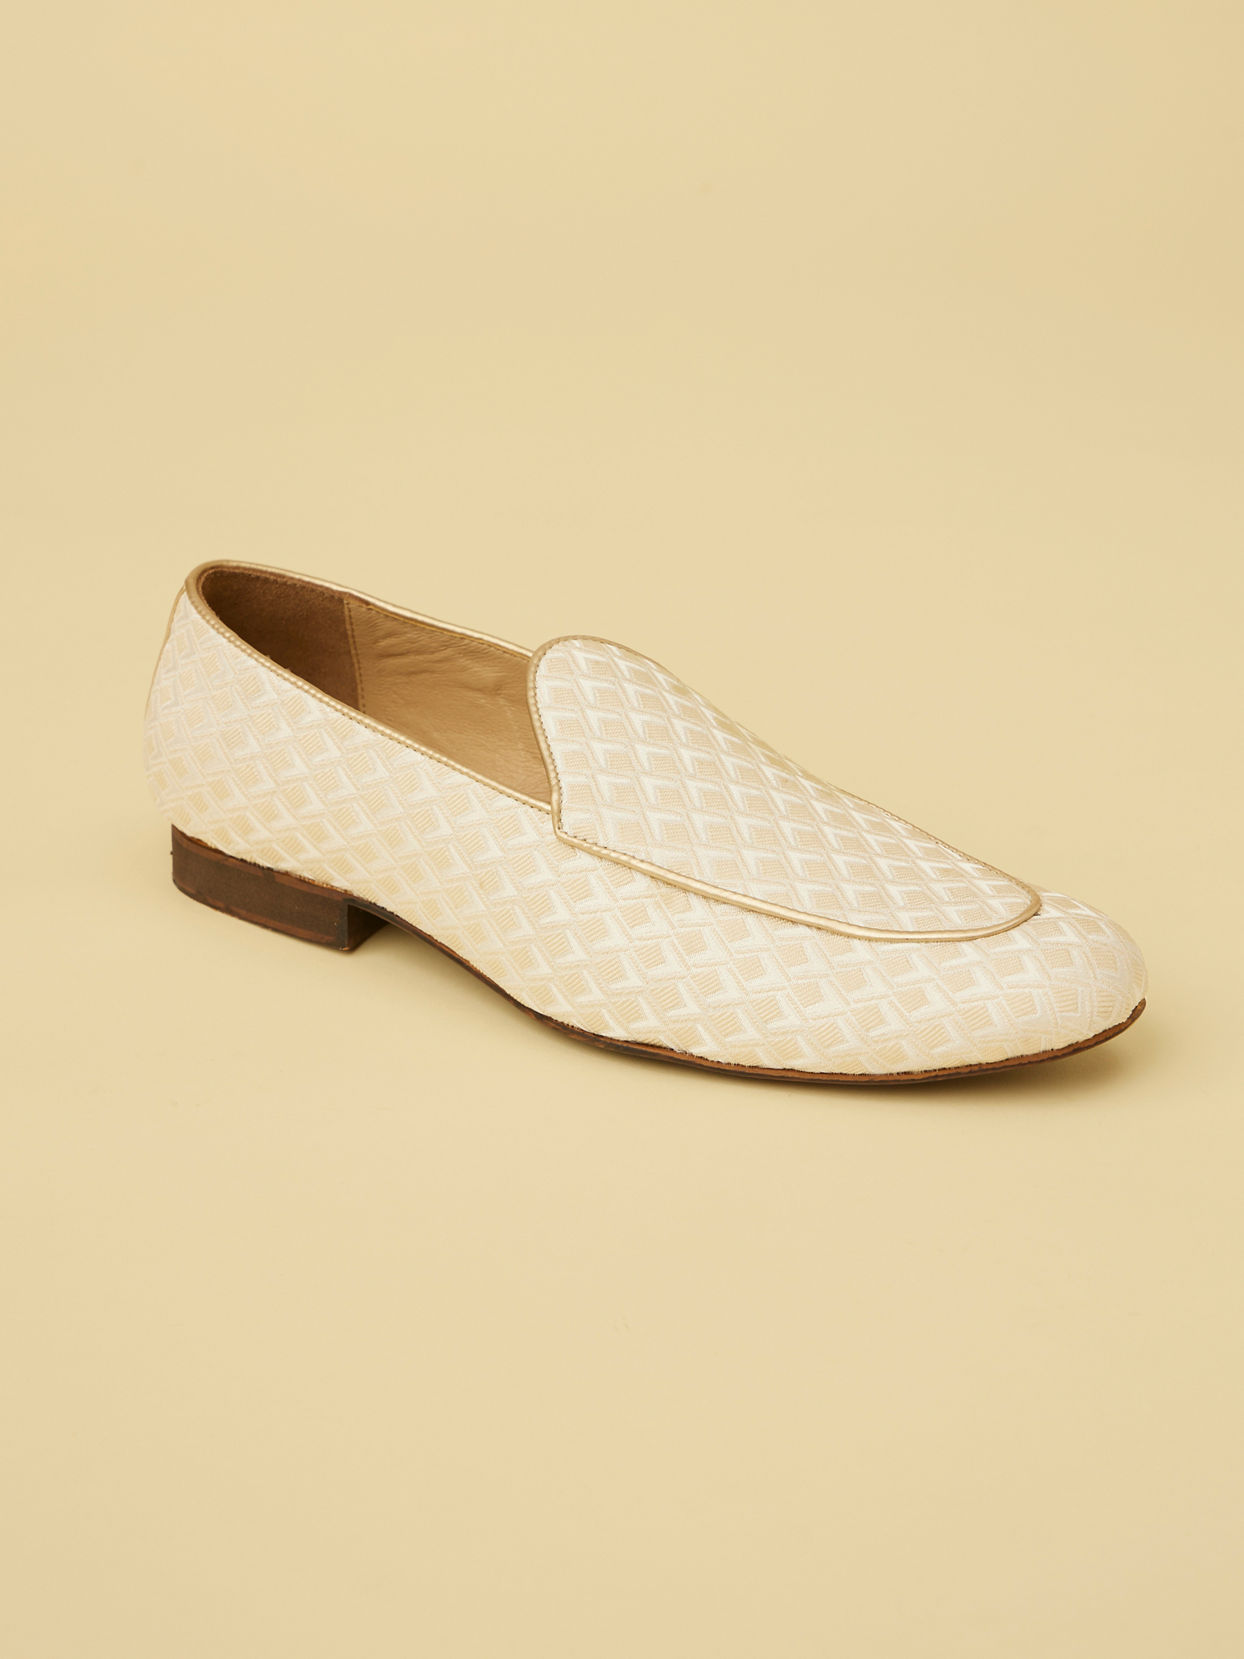 Jasmine White Diamond Patterned Loafer Style Shoes image number 2